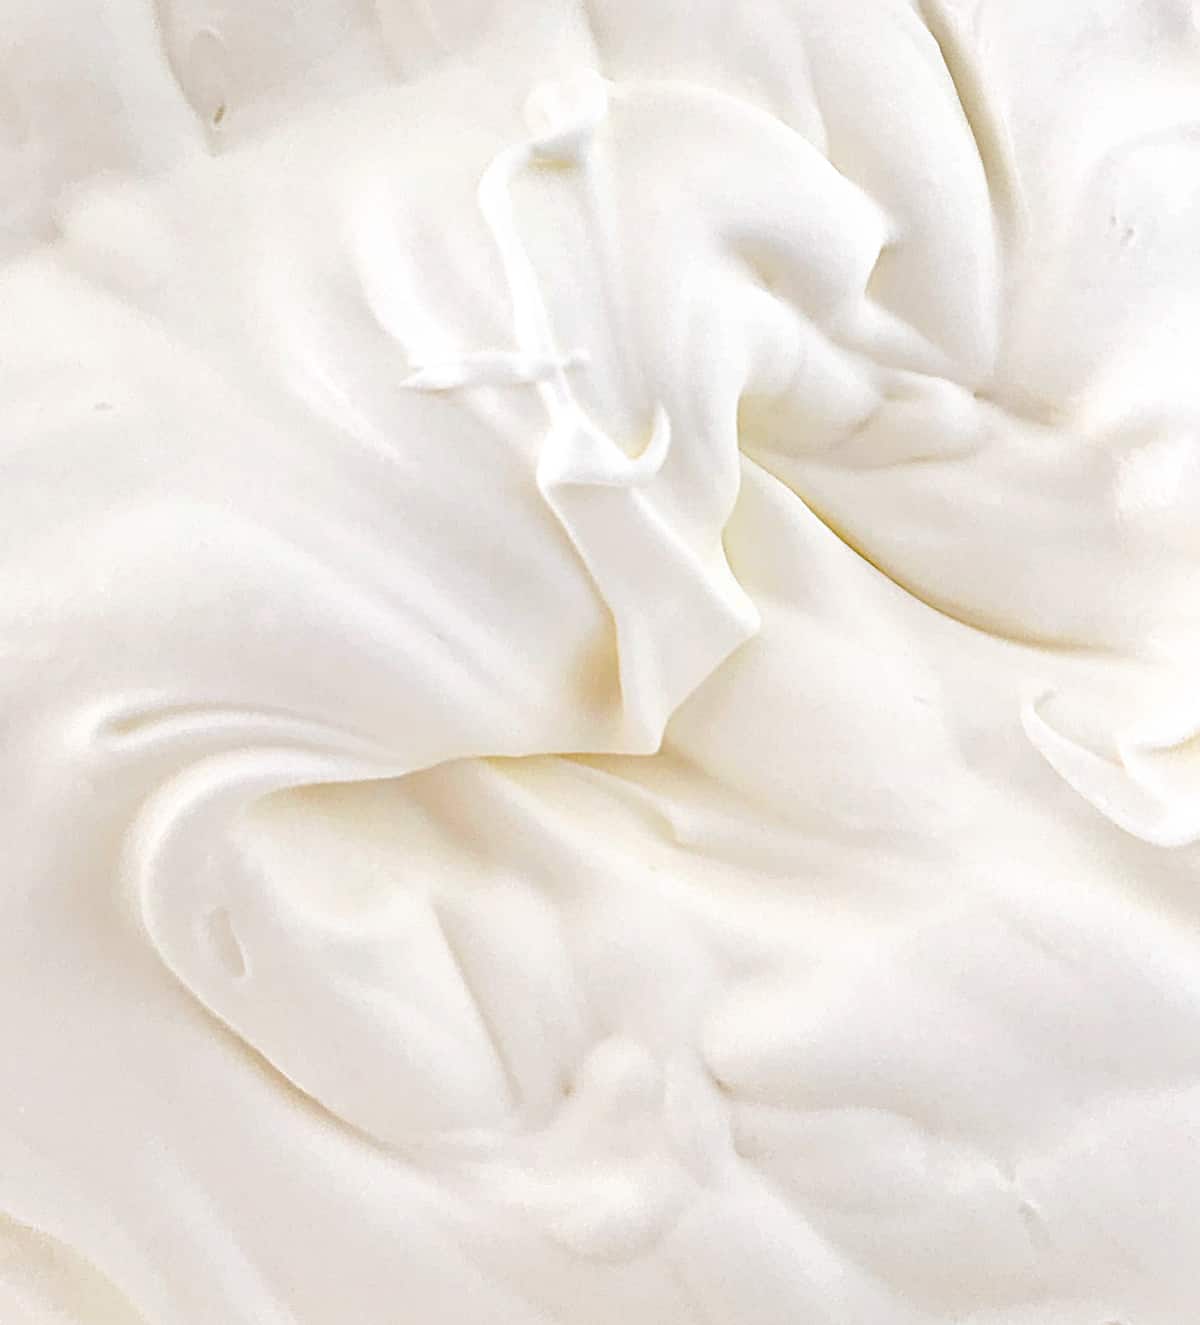 Whipped cream close-up